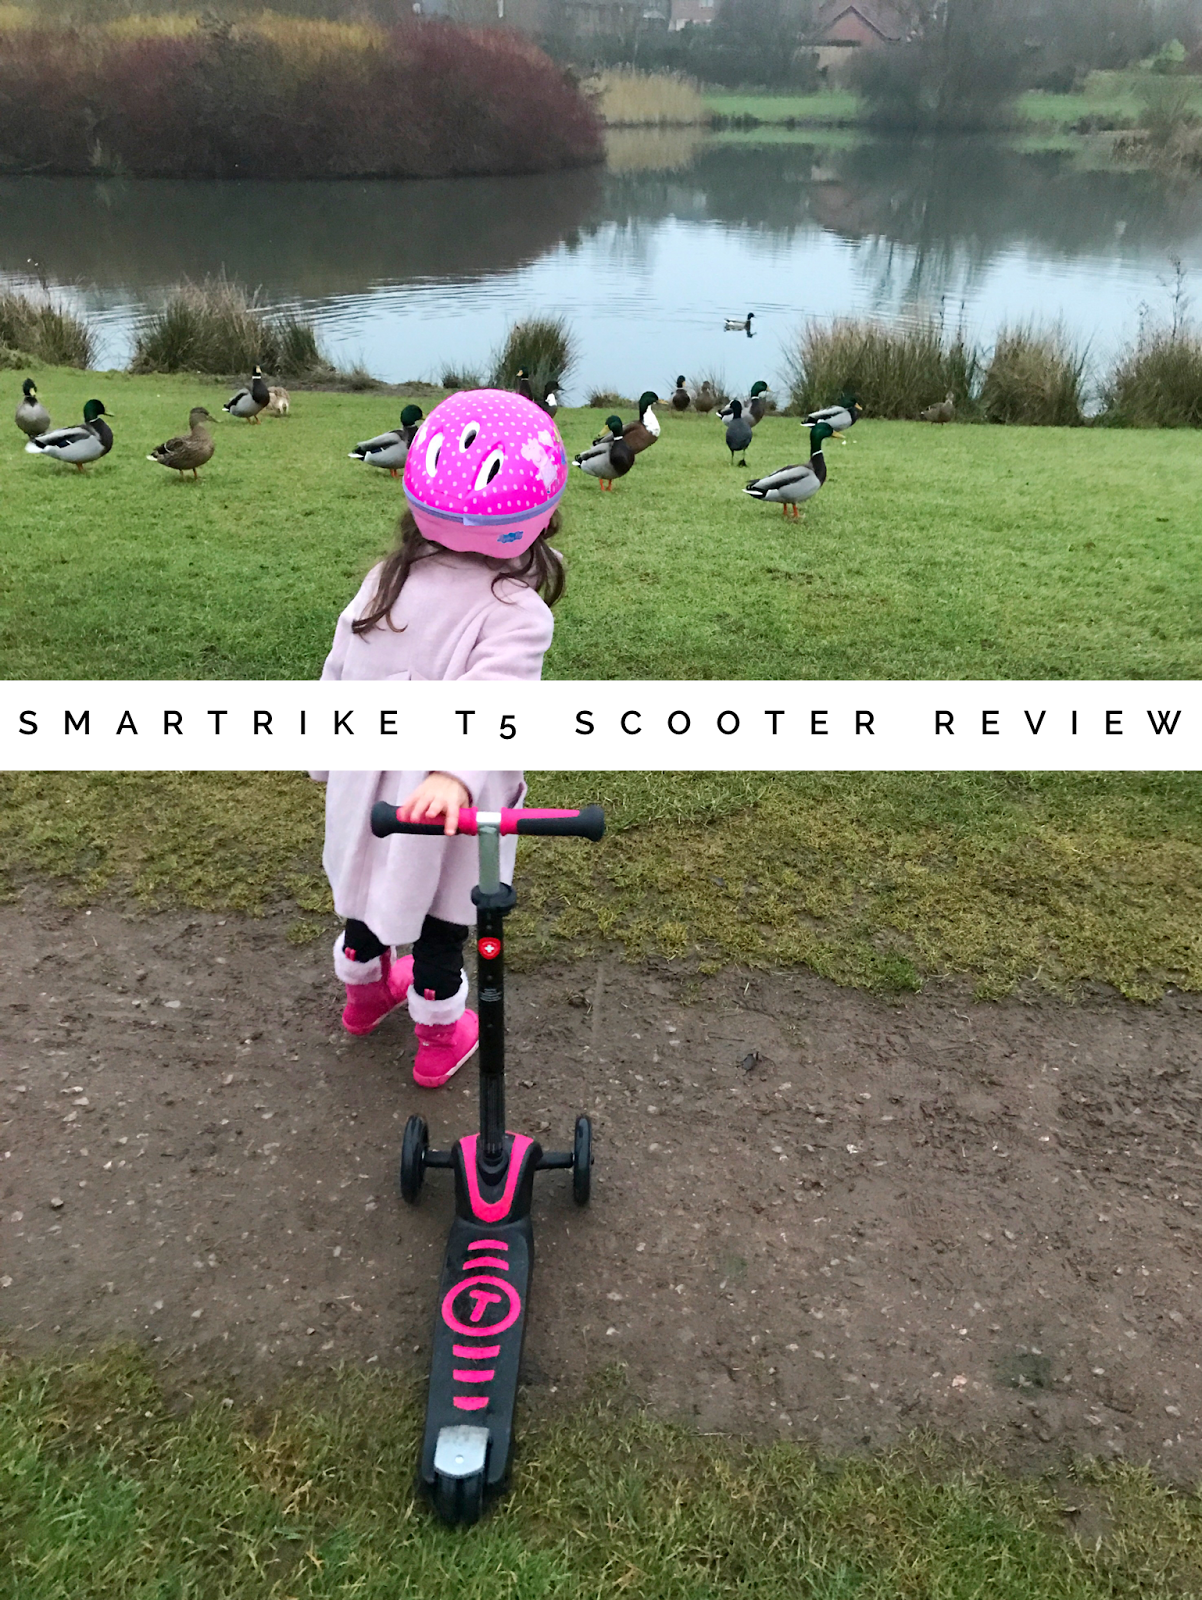 smarTrike T5 scooter review